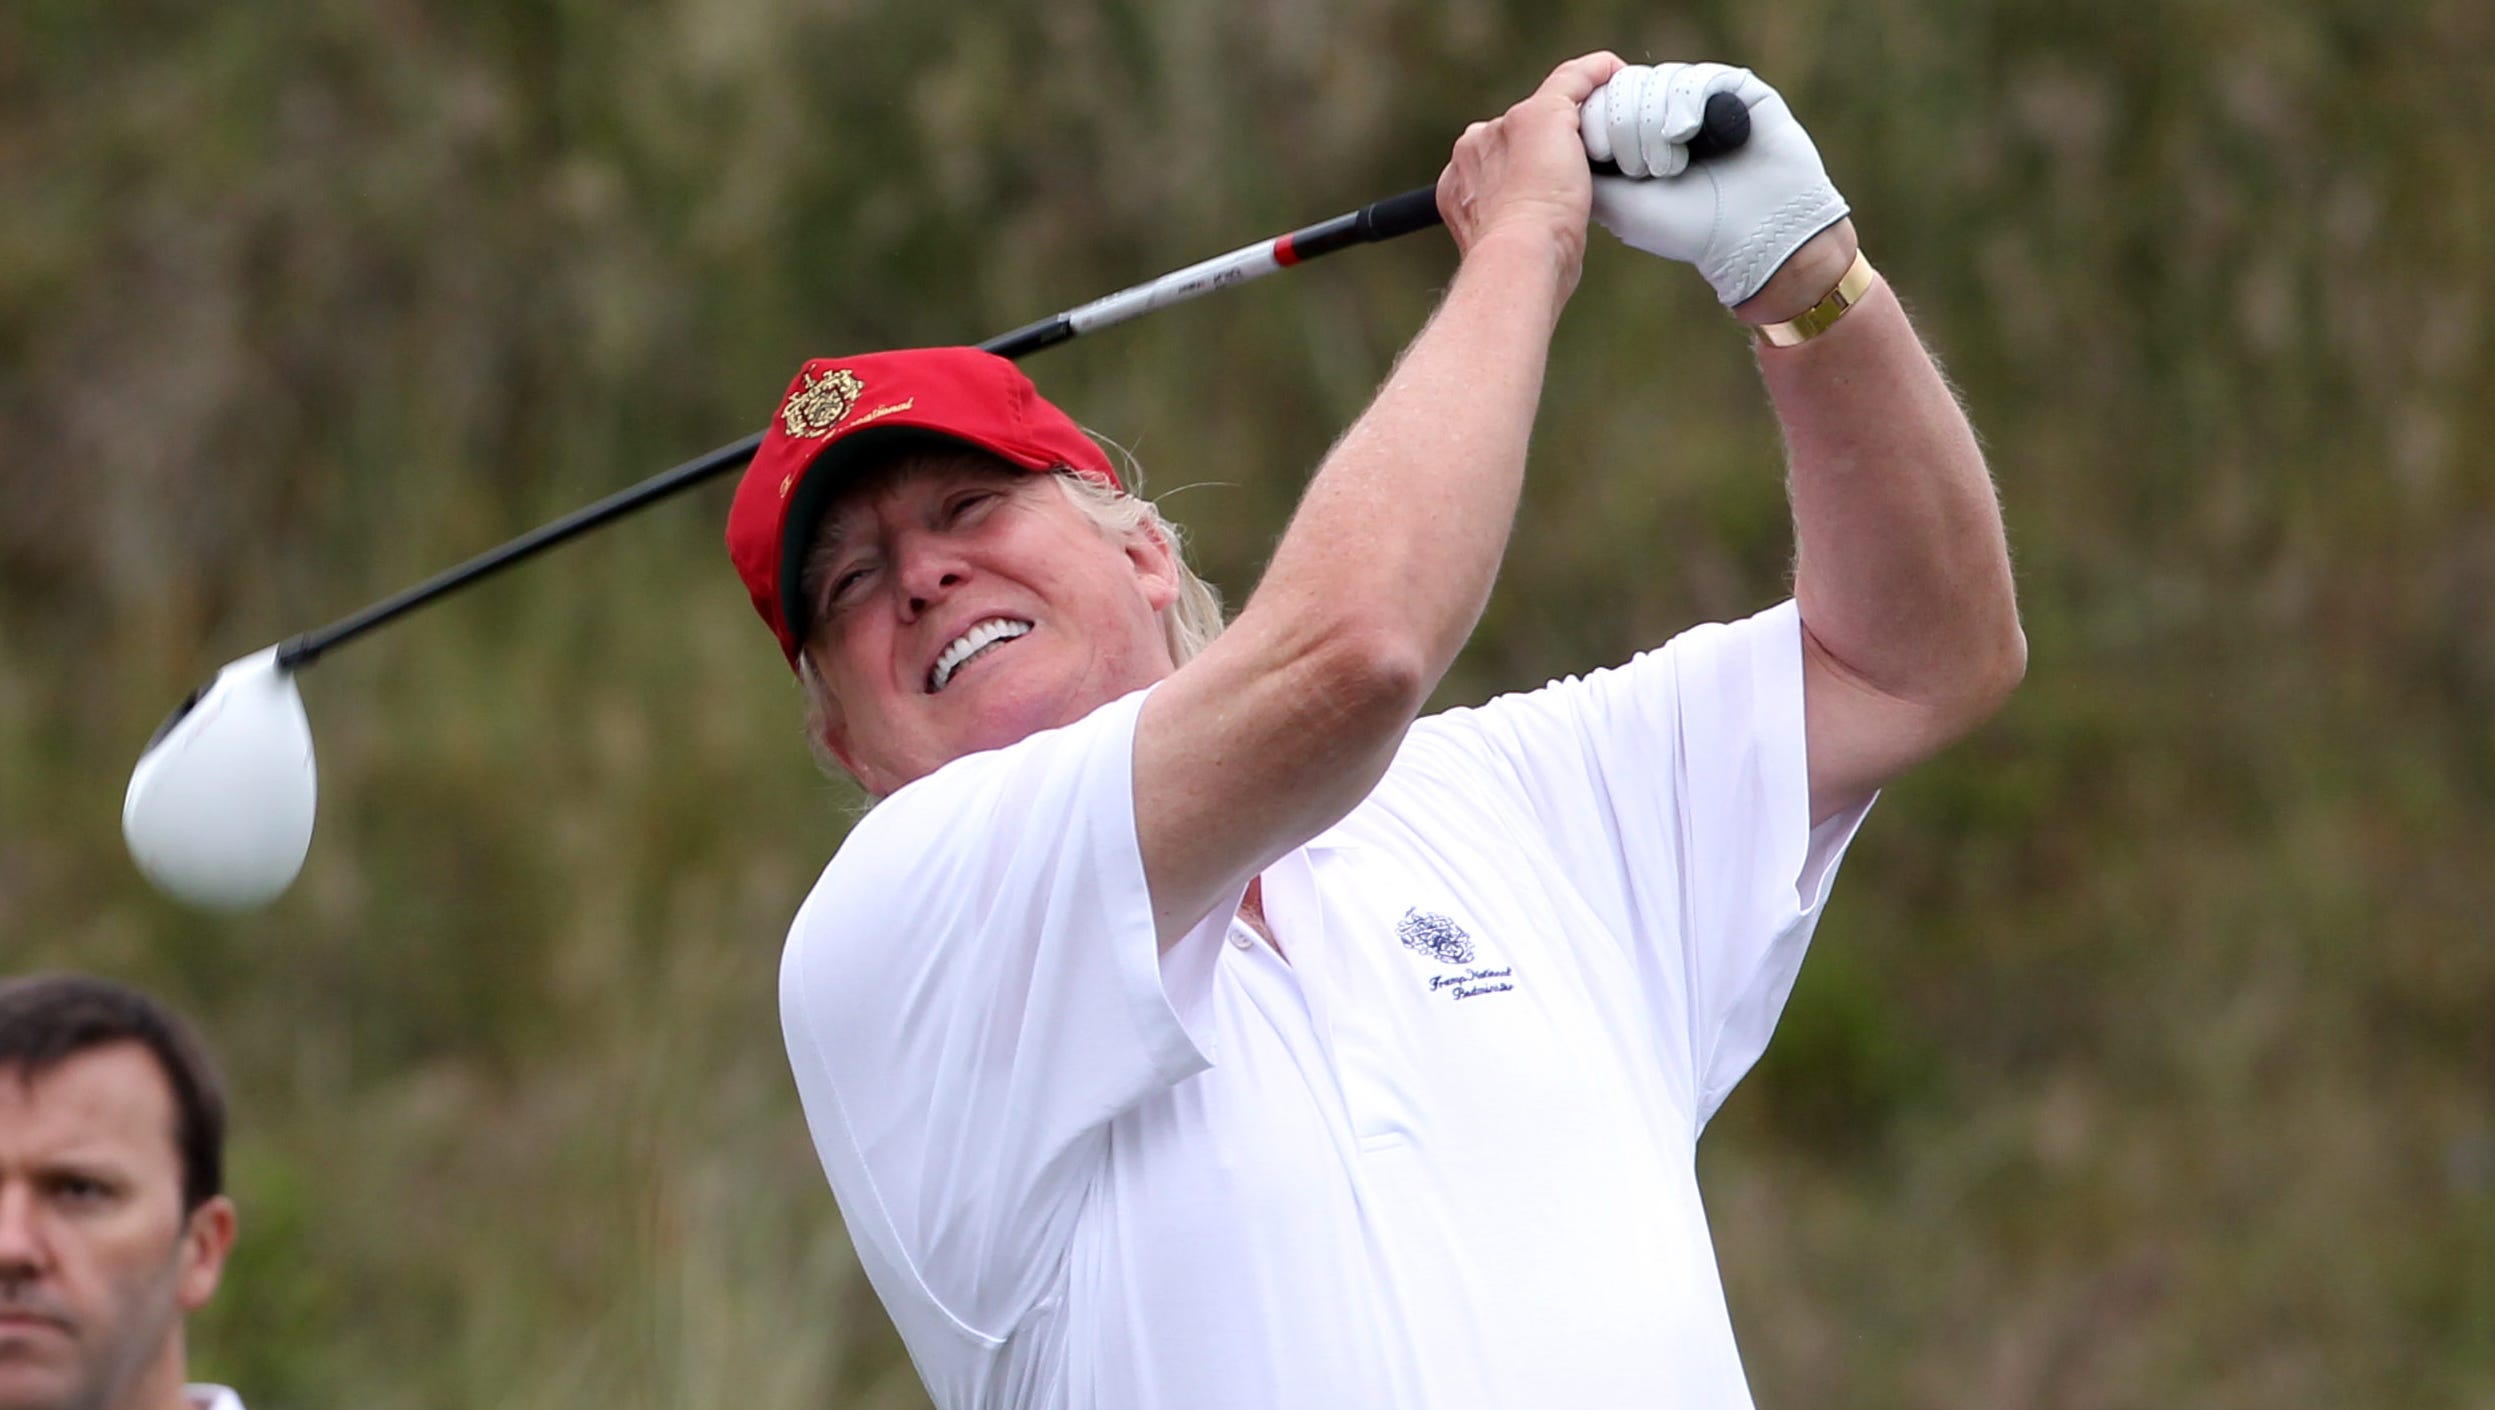 Documents: Donald Trump golf course damaged protected sand dunes